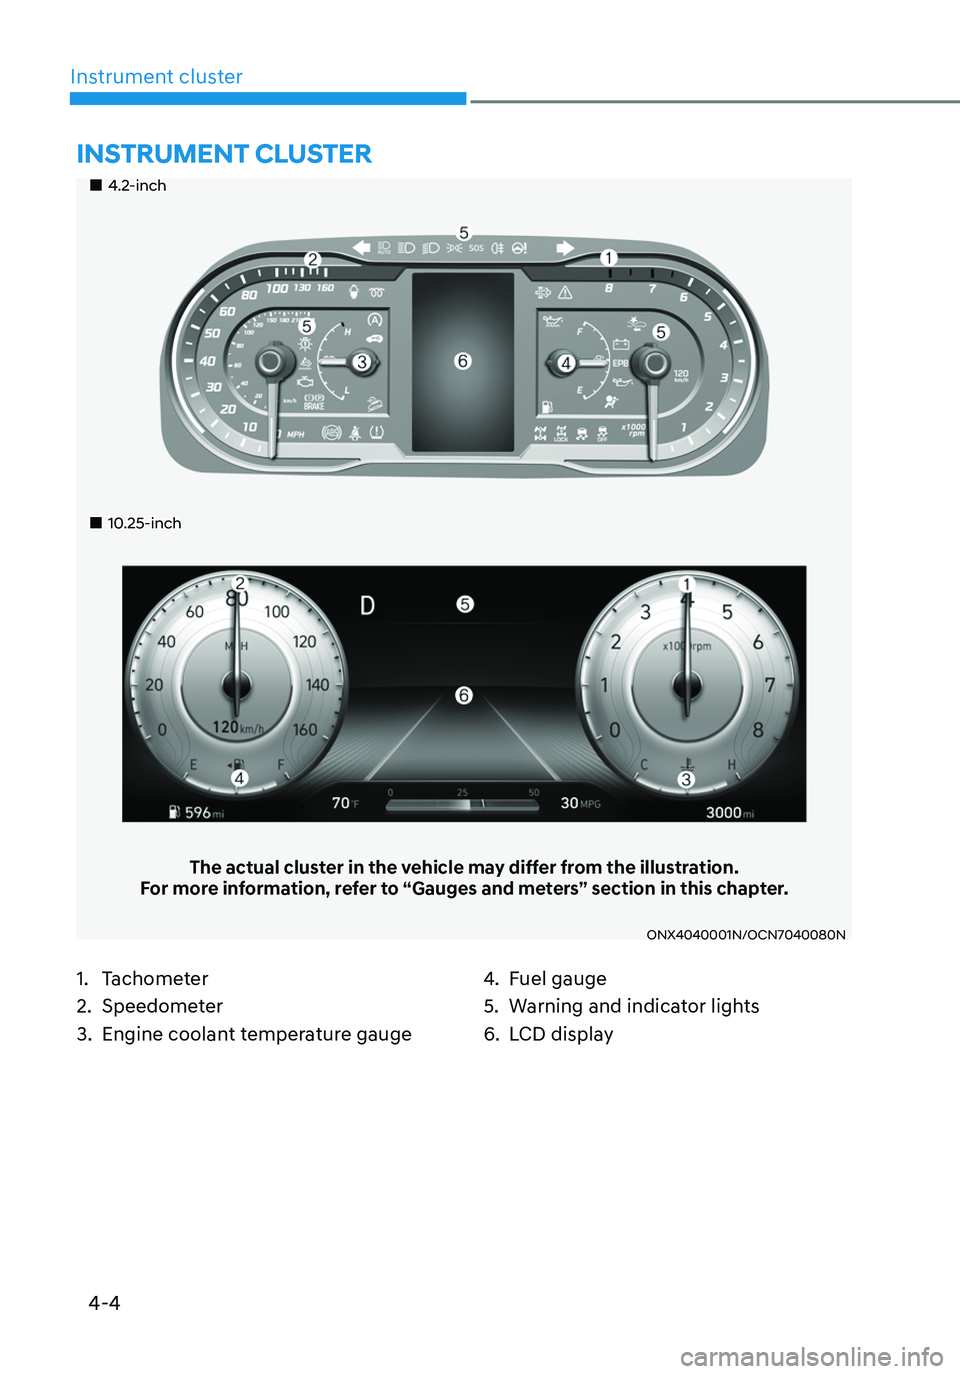 HYUNDAI TUCSON 2022  Owners Manual 4-4
Instrument cluster
„„4.2-inch
„„10.25-inch
The actual cluster in the vehicle may differ from the illustration.For more information, refer to “Gauges and meters” section in 